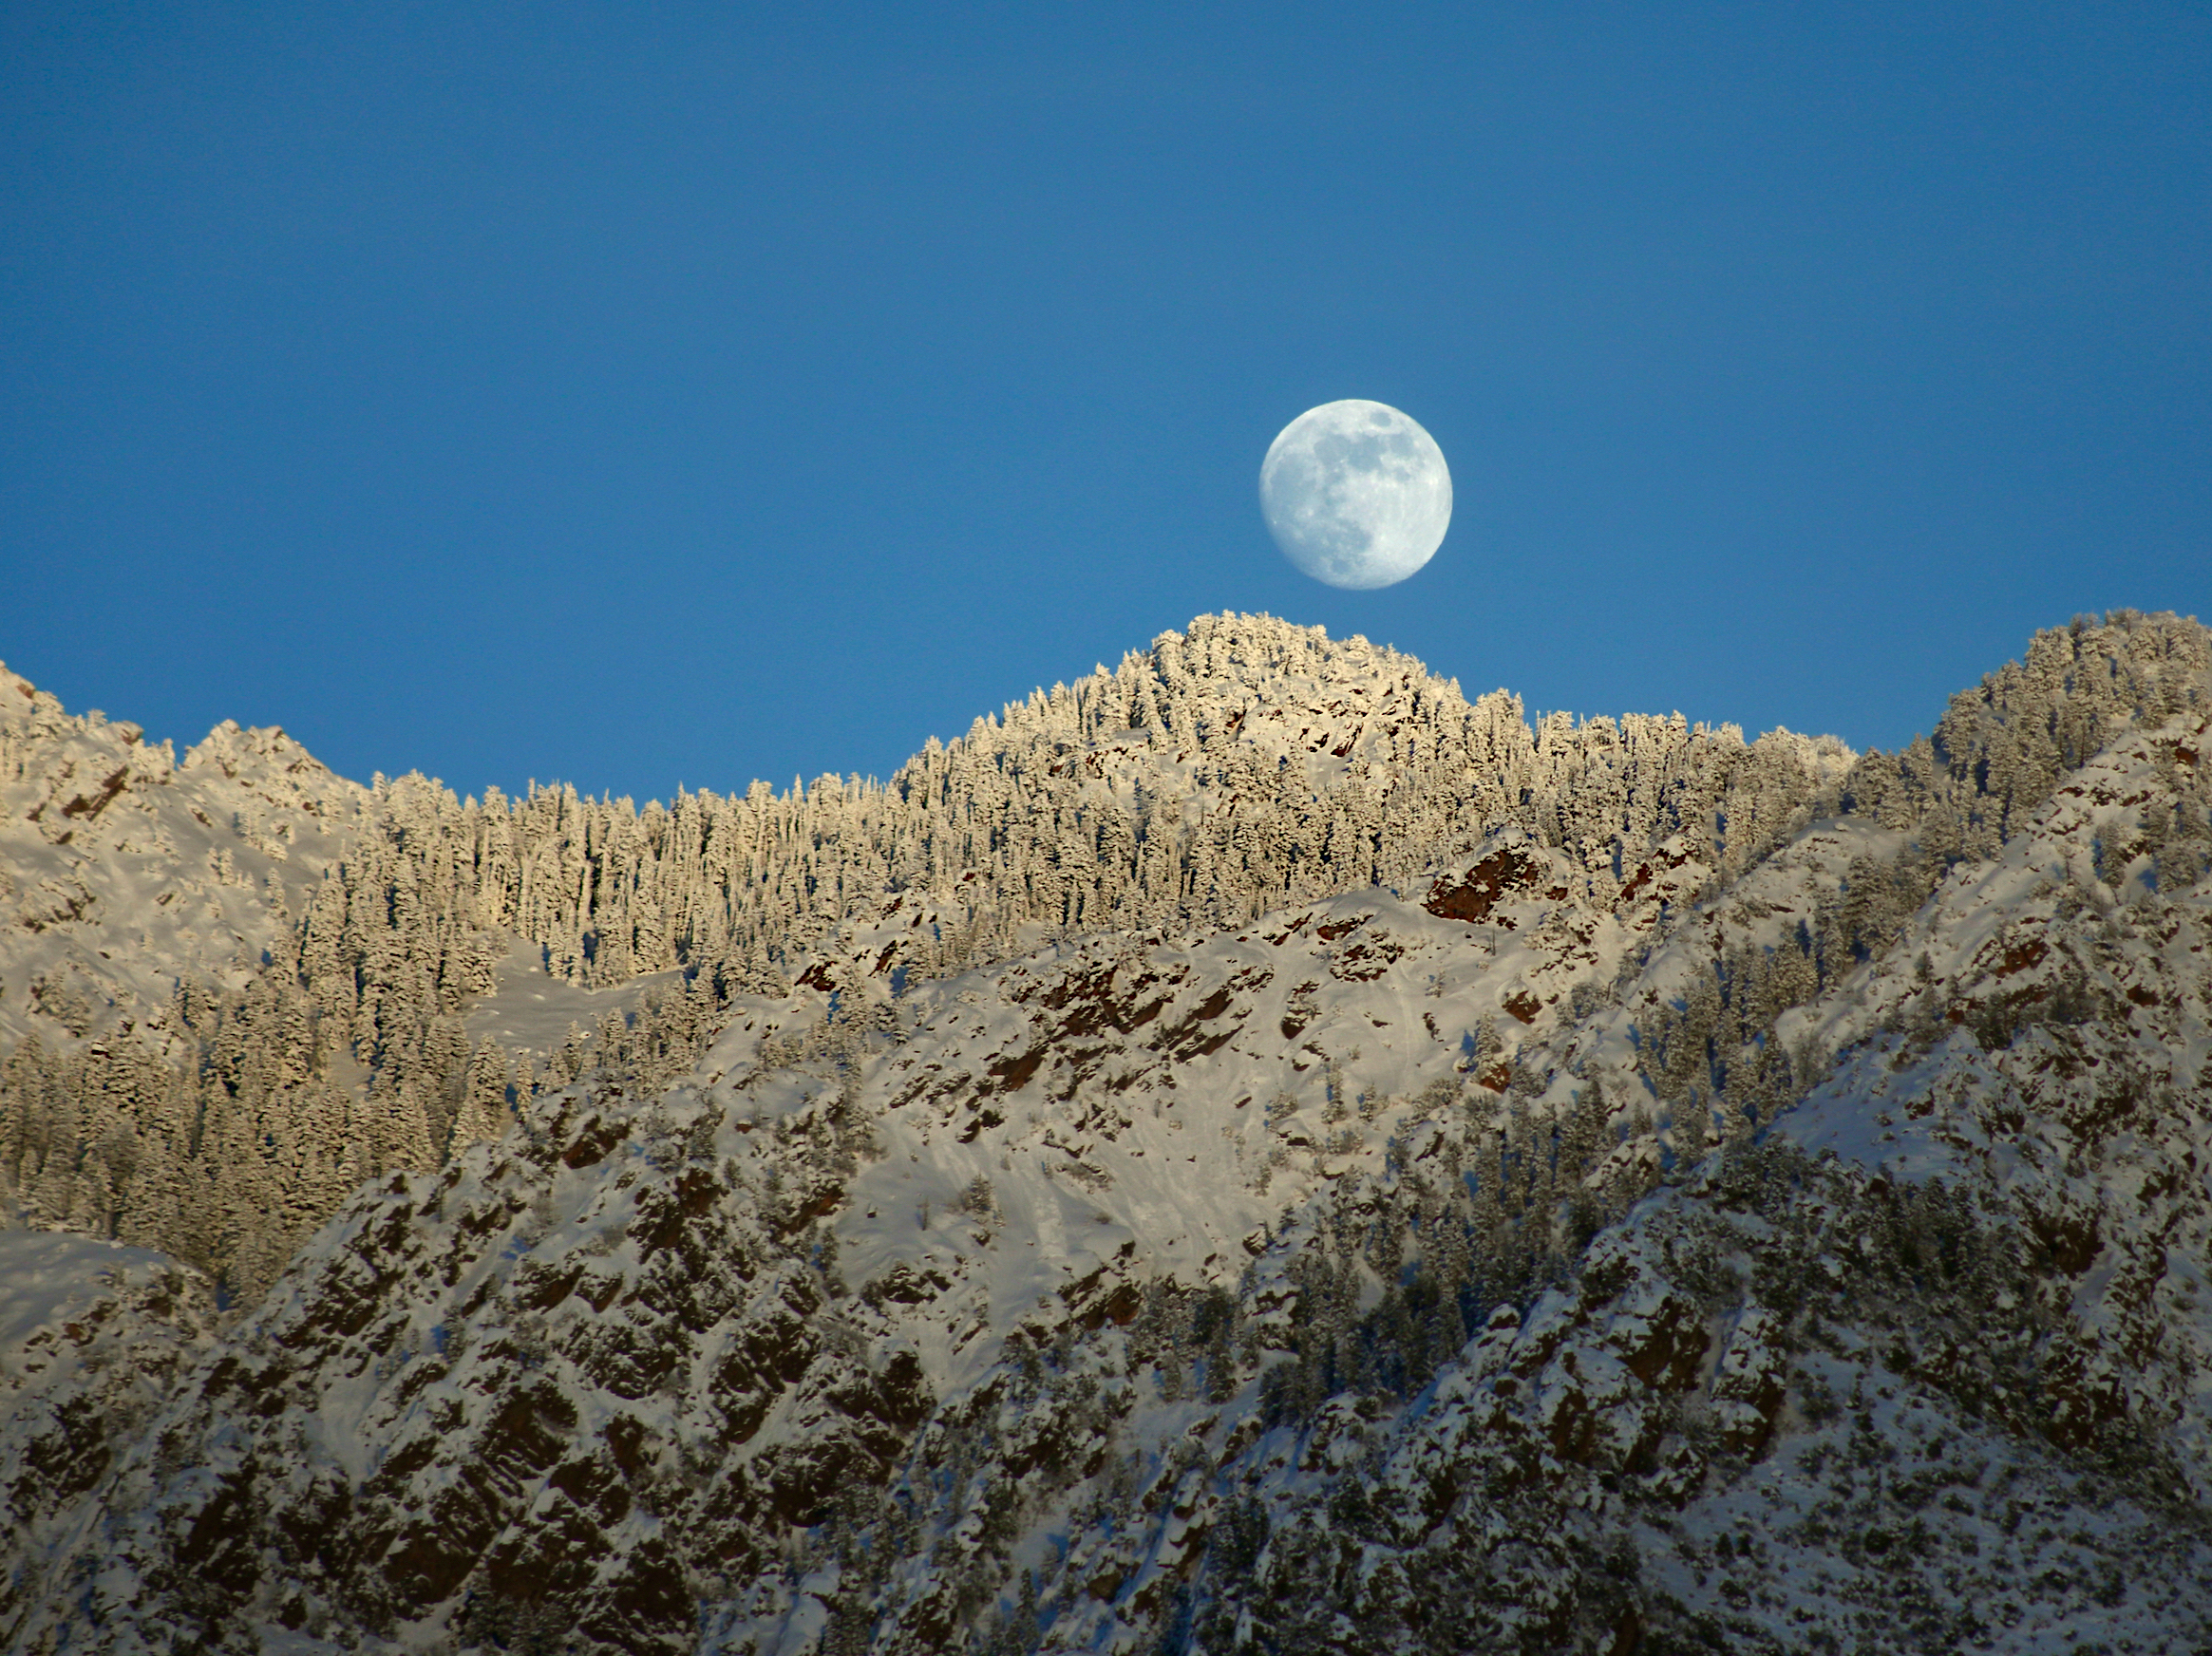 a bright, nearly full moon rises in the sky at dusk over a jagged mountain range with pine forests covered in snow